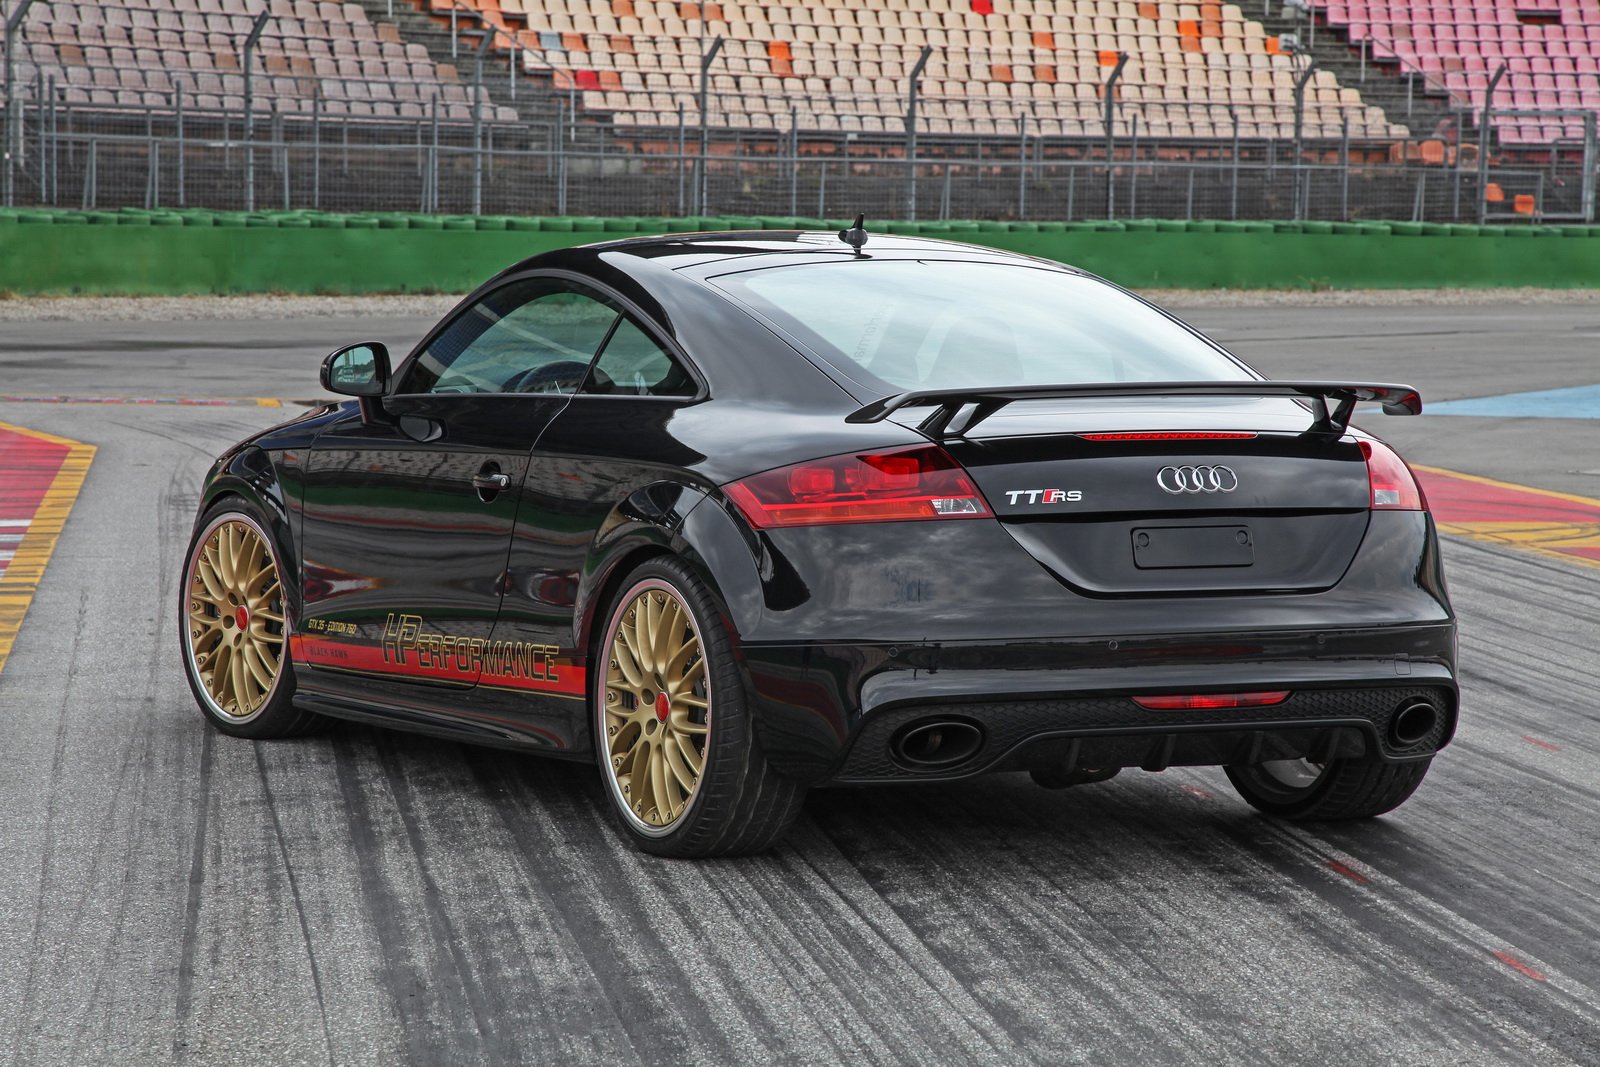 2016, Audi , Tt rs, Performance, Coupe, Cars, Modified Wallpaper